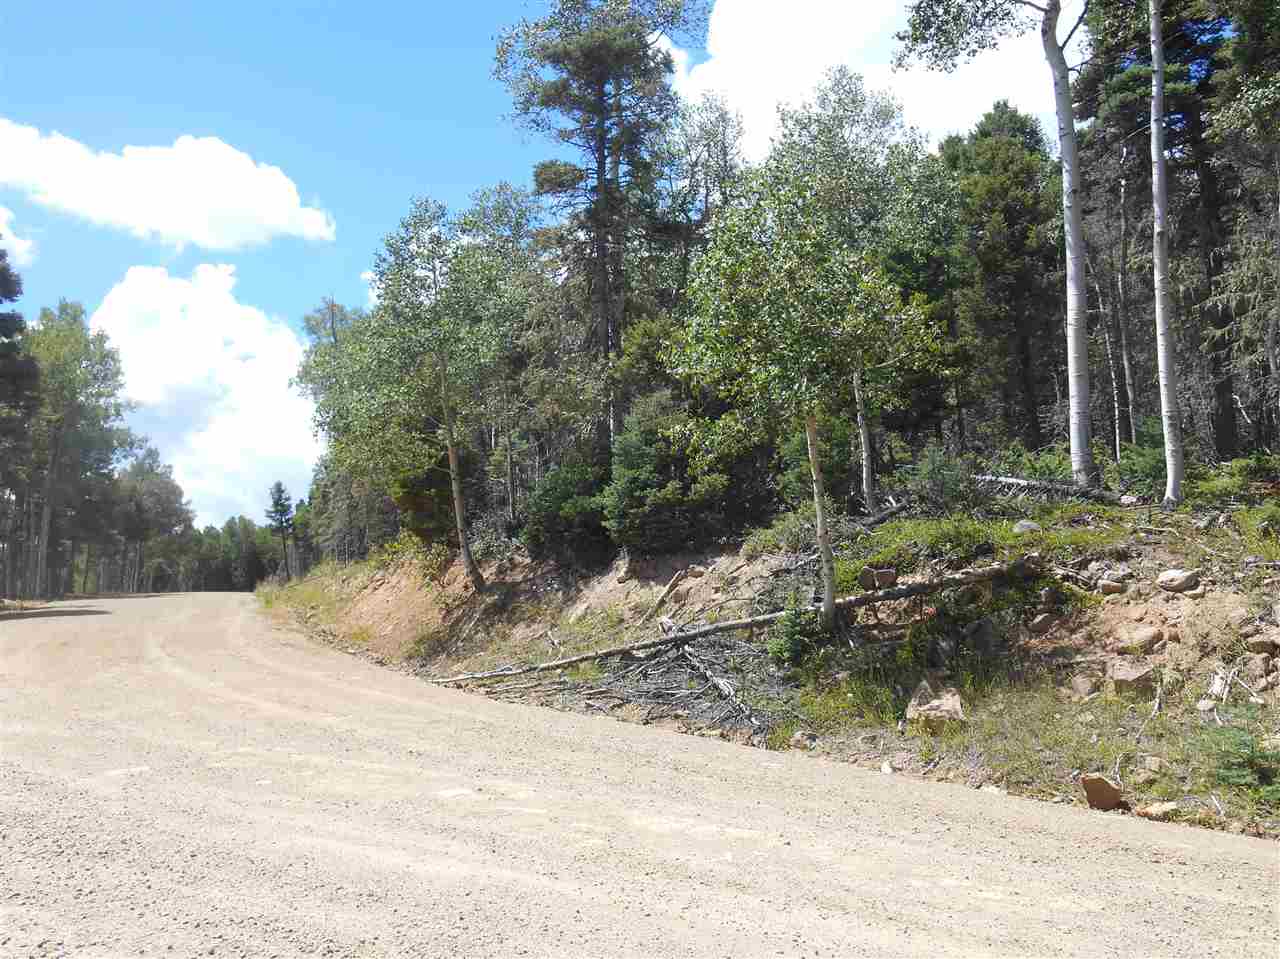 Heavily wooded 1.79 acre lot with various views of east valley rim depending on building site.  Property has nice mix of aspen, pine, blue spruce trees, and mountain vegetation.  Good year-round access via village maintained road.